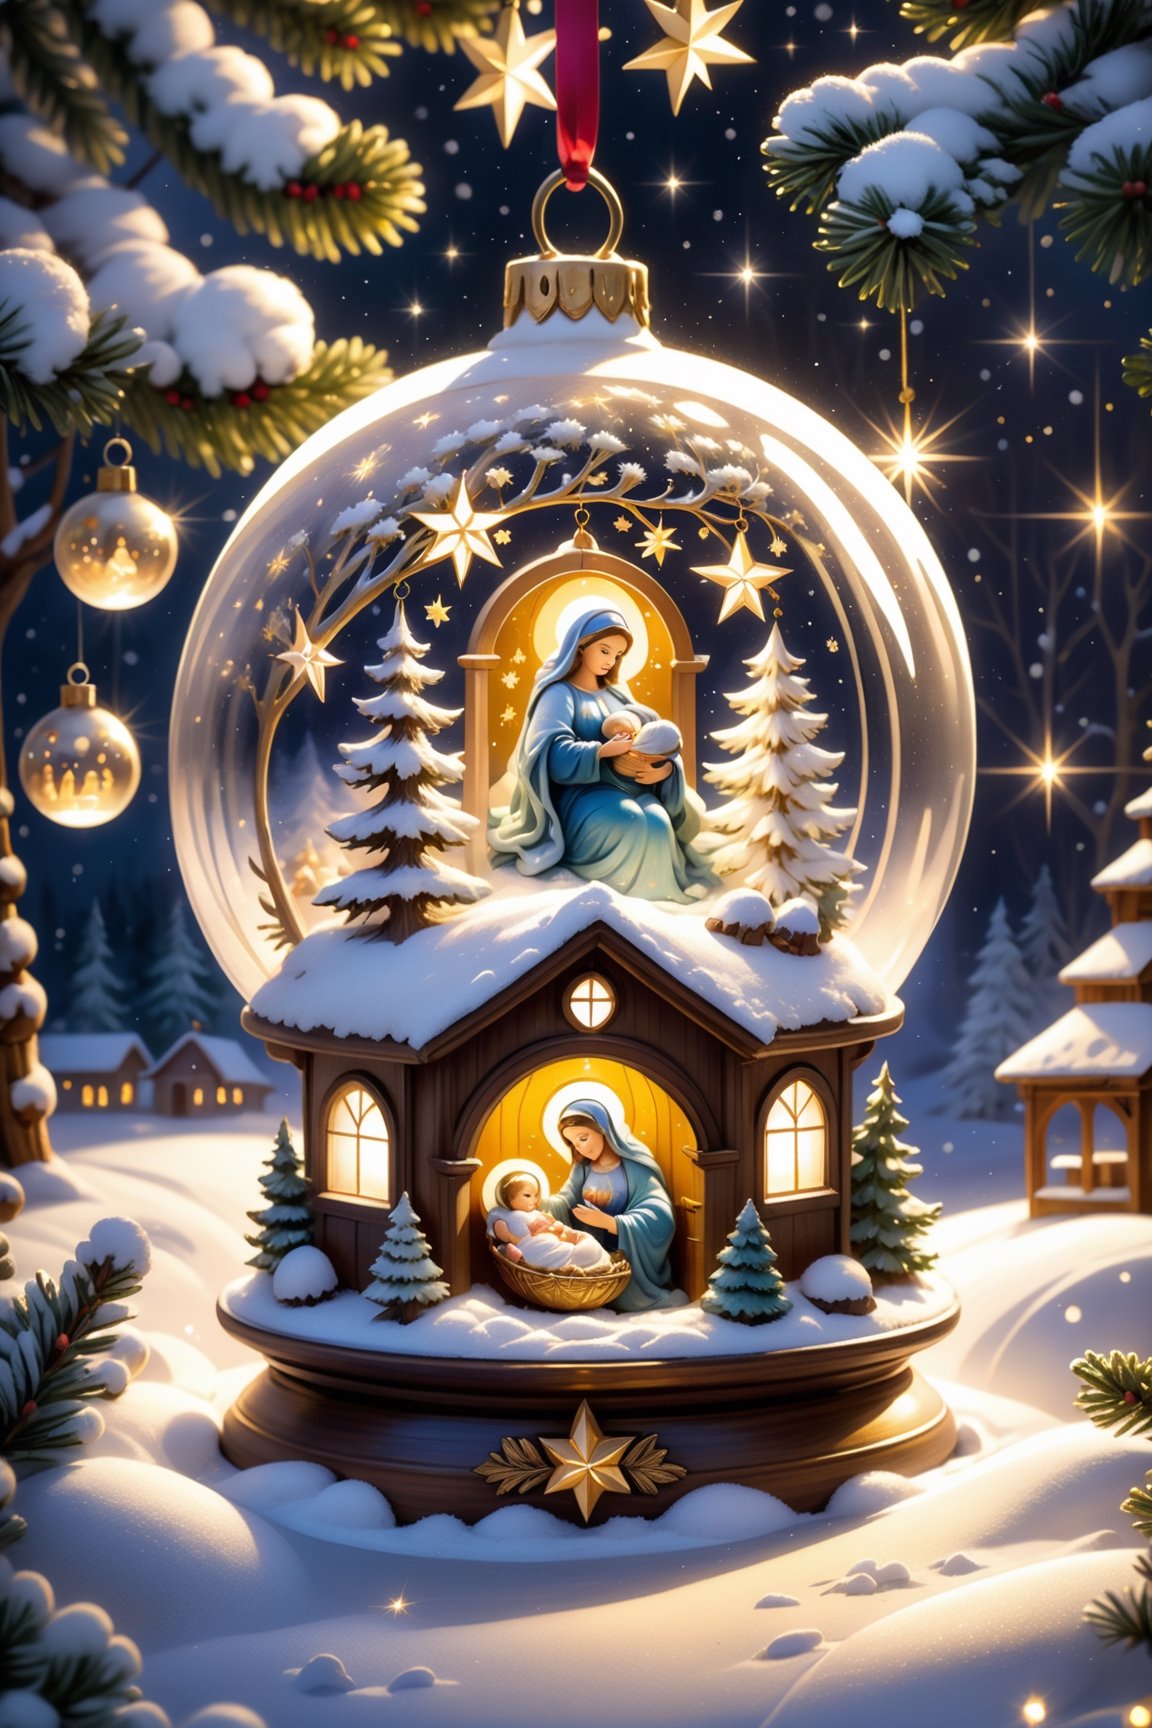 A Christmas tree ball made of transparent glass and a gold ribbon hanging from a fir tree with berries outside in a snow-covered field and at night when it snows, in the foreground is a glass ball, inside which there are three main figures of the nativity scene: St. Joseph, Mary and baby Jesus, illuminated by a star, the style of Michal Karch, Daniel Merriam, Victor Ngai and Guillermo del Toro: ornate, dynamic, with particles, intricate, elegant, highly detailed, focused, artistic, soft, clear focus, dream, in pastel colors, romantic, warm, imaginative, juicy, soft, cozy, wet, Silke Leffler, Gabriel Pacheco, Chihiro Iwasaki, Oliver Jeffers, captivating, Mysterious